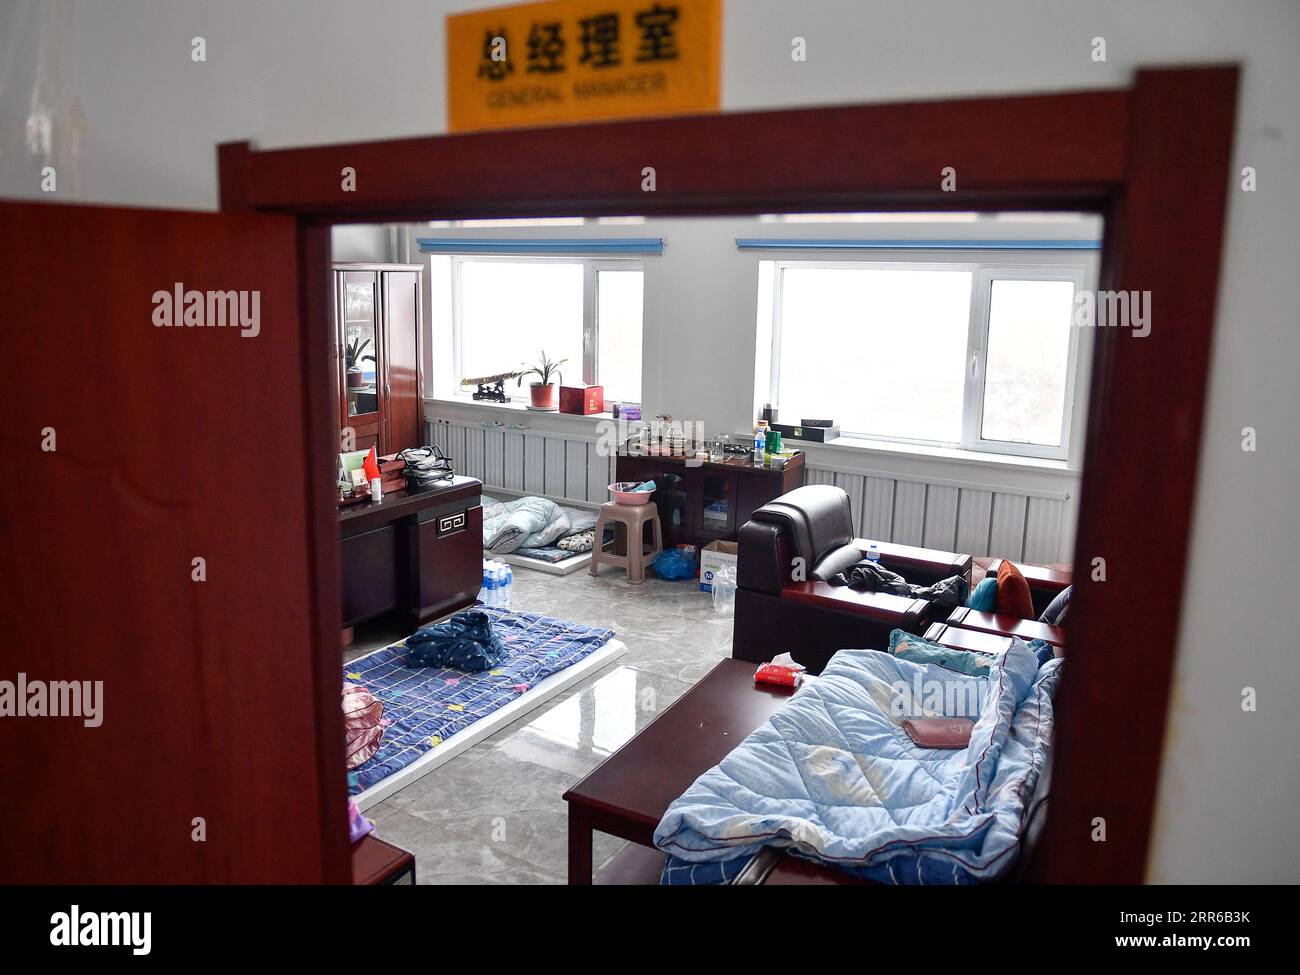 210203 -- TONGHUA, Feb. 3, 2021 -- Zhao Hongxia s office is seen converted into a temporary dormitory in Jiahe Catering Company in Tonghua City of northeast China s Jilin Province, Jan. 21, 2021. The city is slowing down to curb the pandemic, but we re not closing up. Instead, we re busier than ever, said Zhao Hongxia, general manager of Jiahe Catering Company. The company was originally a boxed meal supplier for primary and secondary schools in Tonghua City. Since the COVID-19 outbreak in Tonghua, the company has accepted a new task of providing meals to front-line staff and people under quar Stock Photo